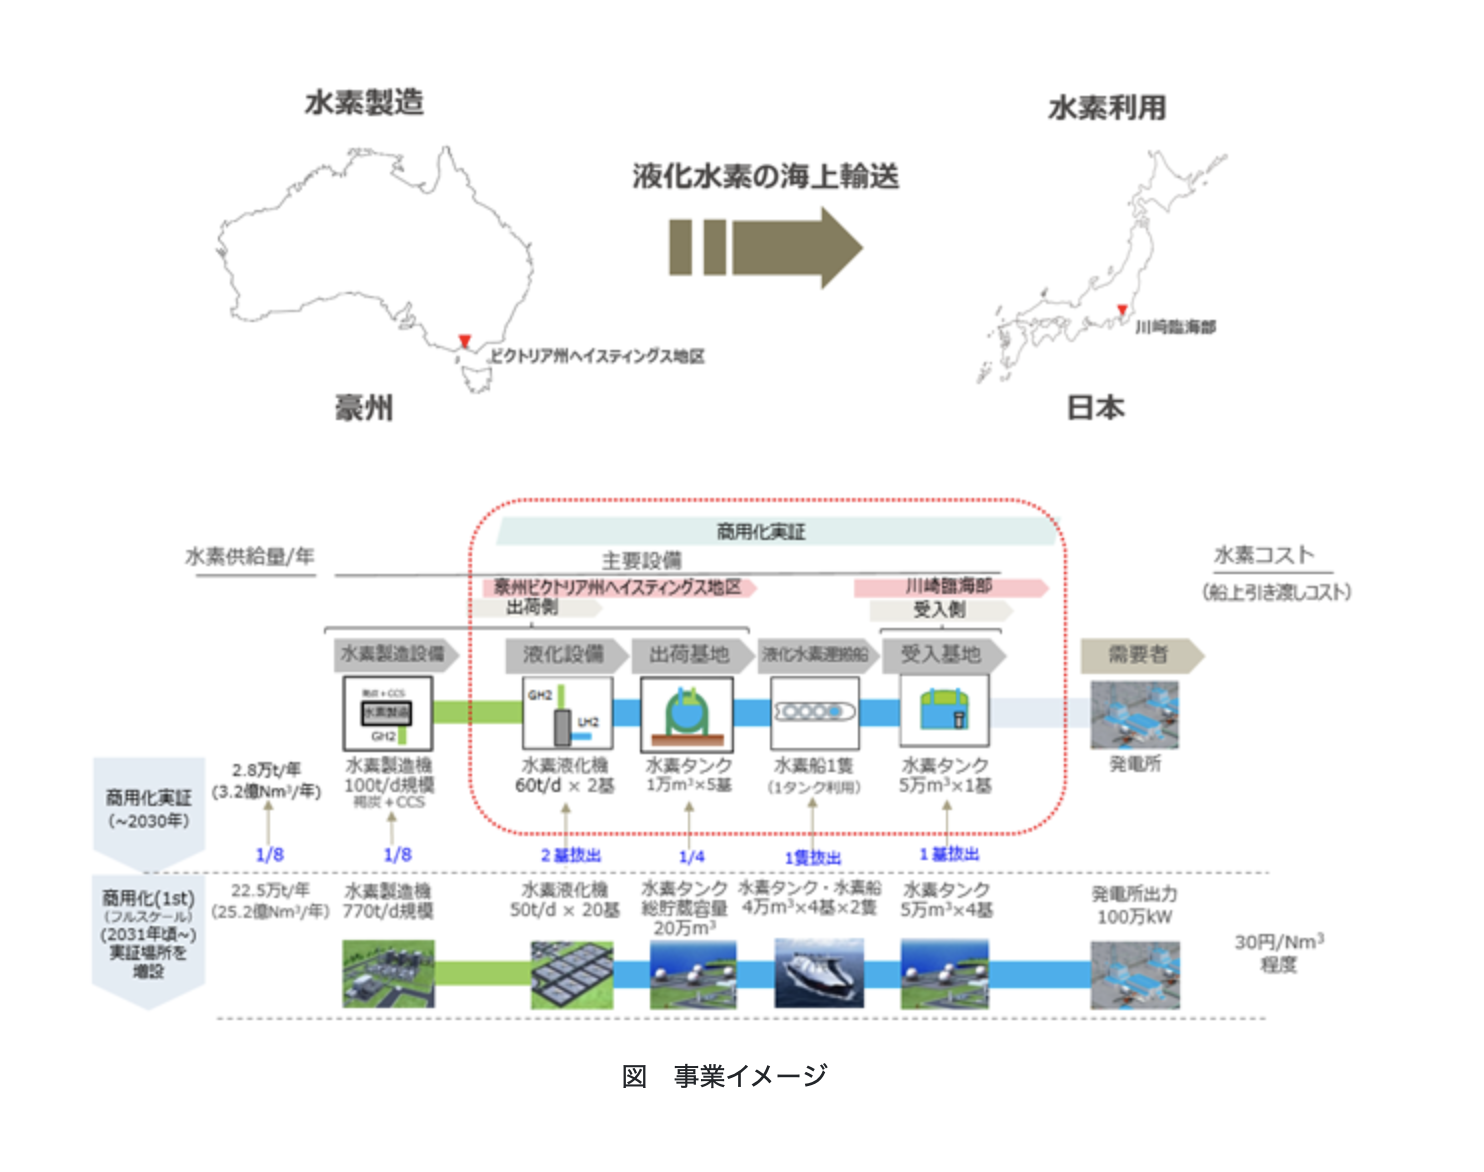 Shipping and receiving locations for Japan’s liquefied hydrogen supply chain